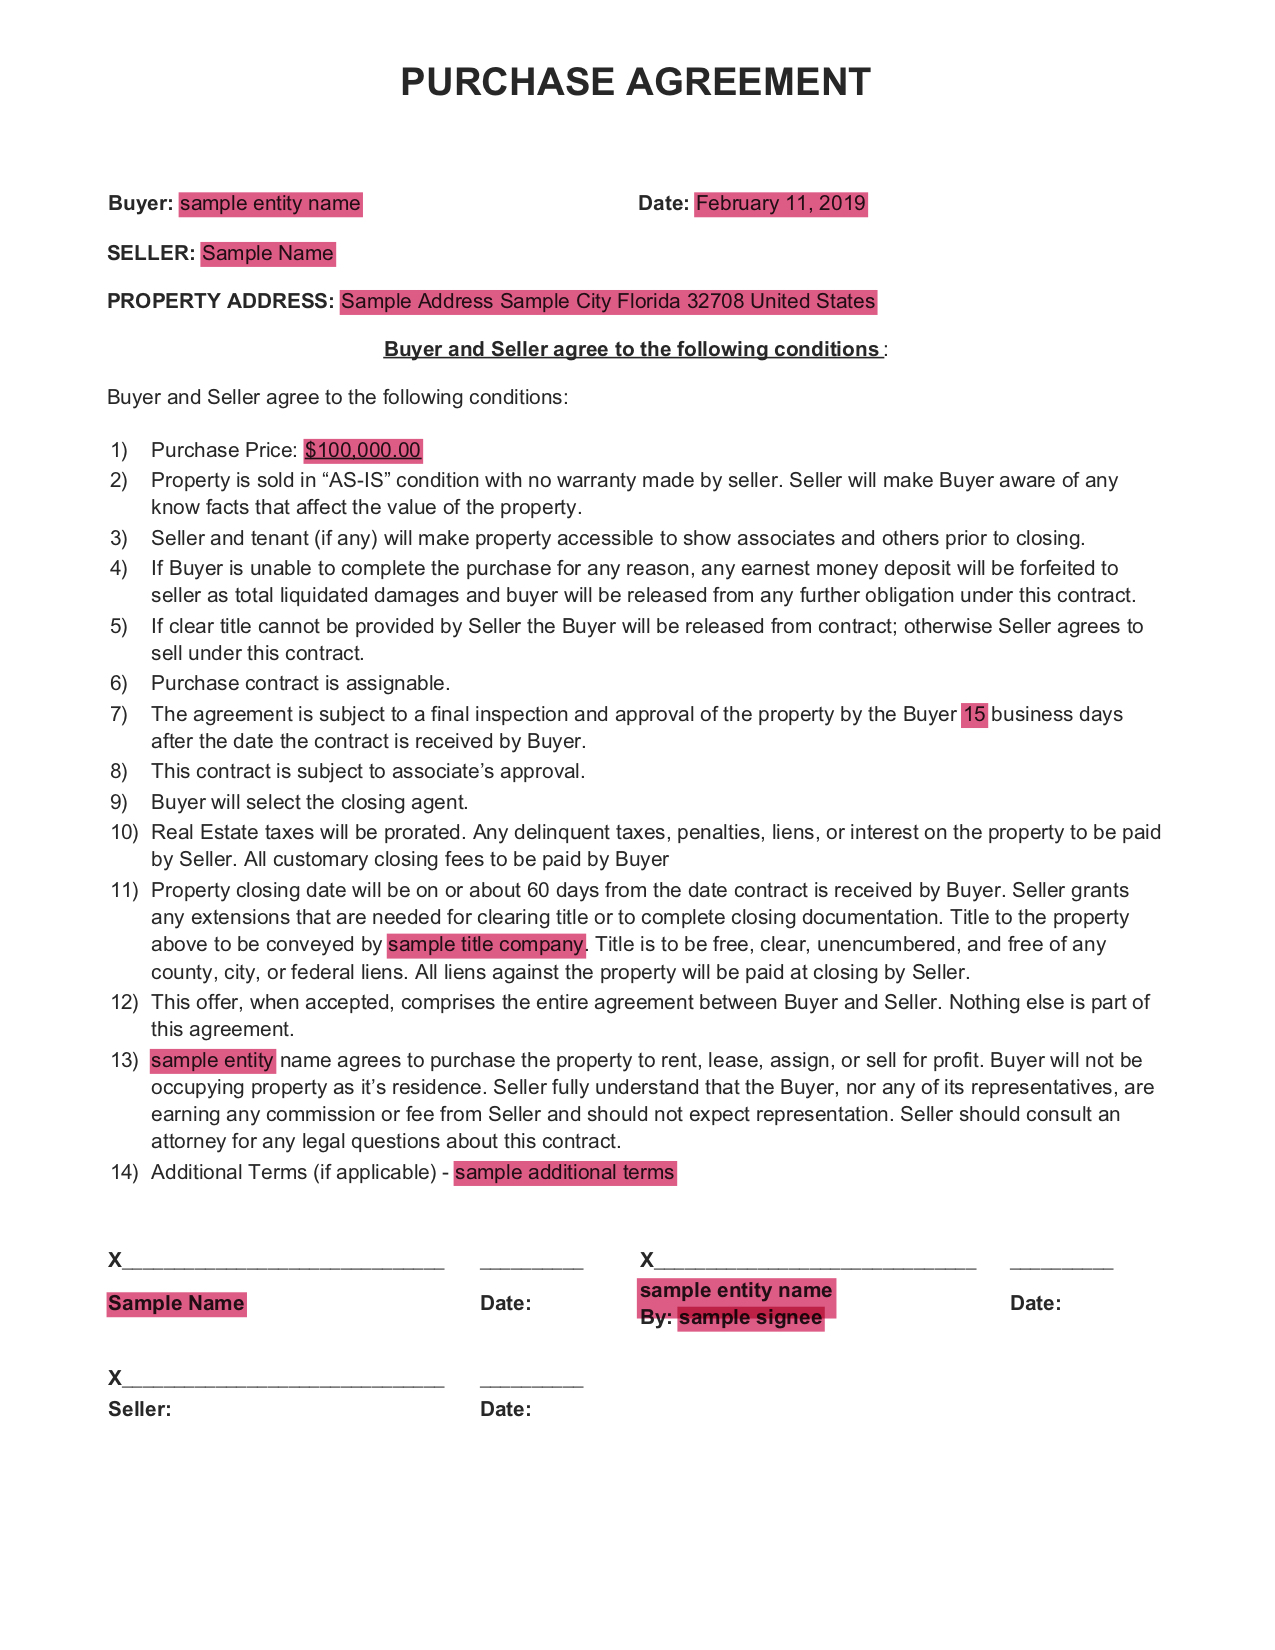 Real Estate Purchase Agreement Form Purchase Contract Investorfuse Real Estate Investor Follow Up